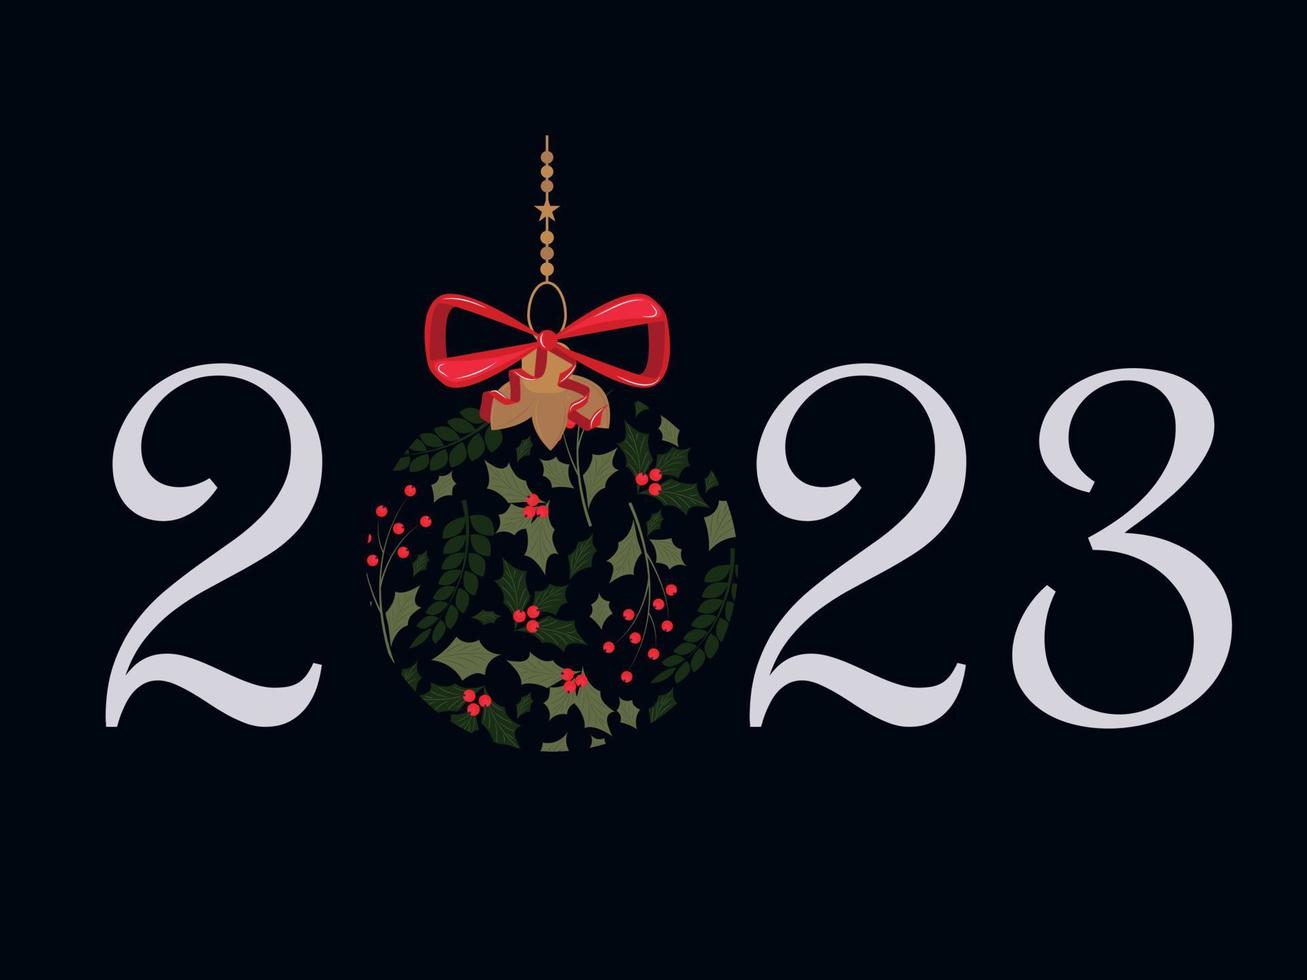 Christmas card 2023. Numbers for the new year. High quality vector illustration.